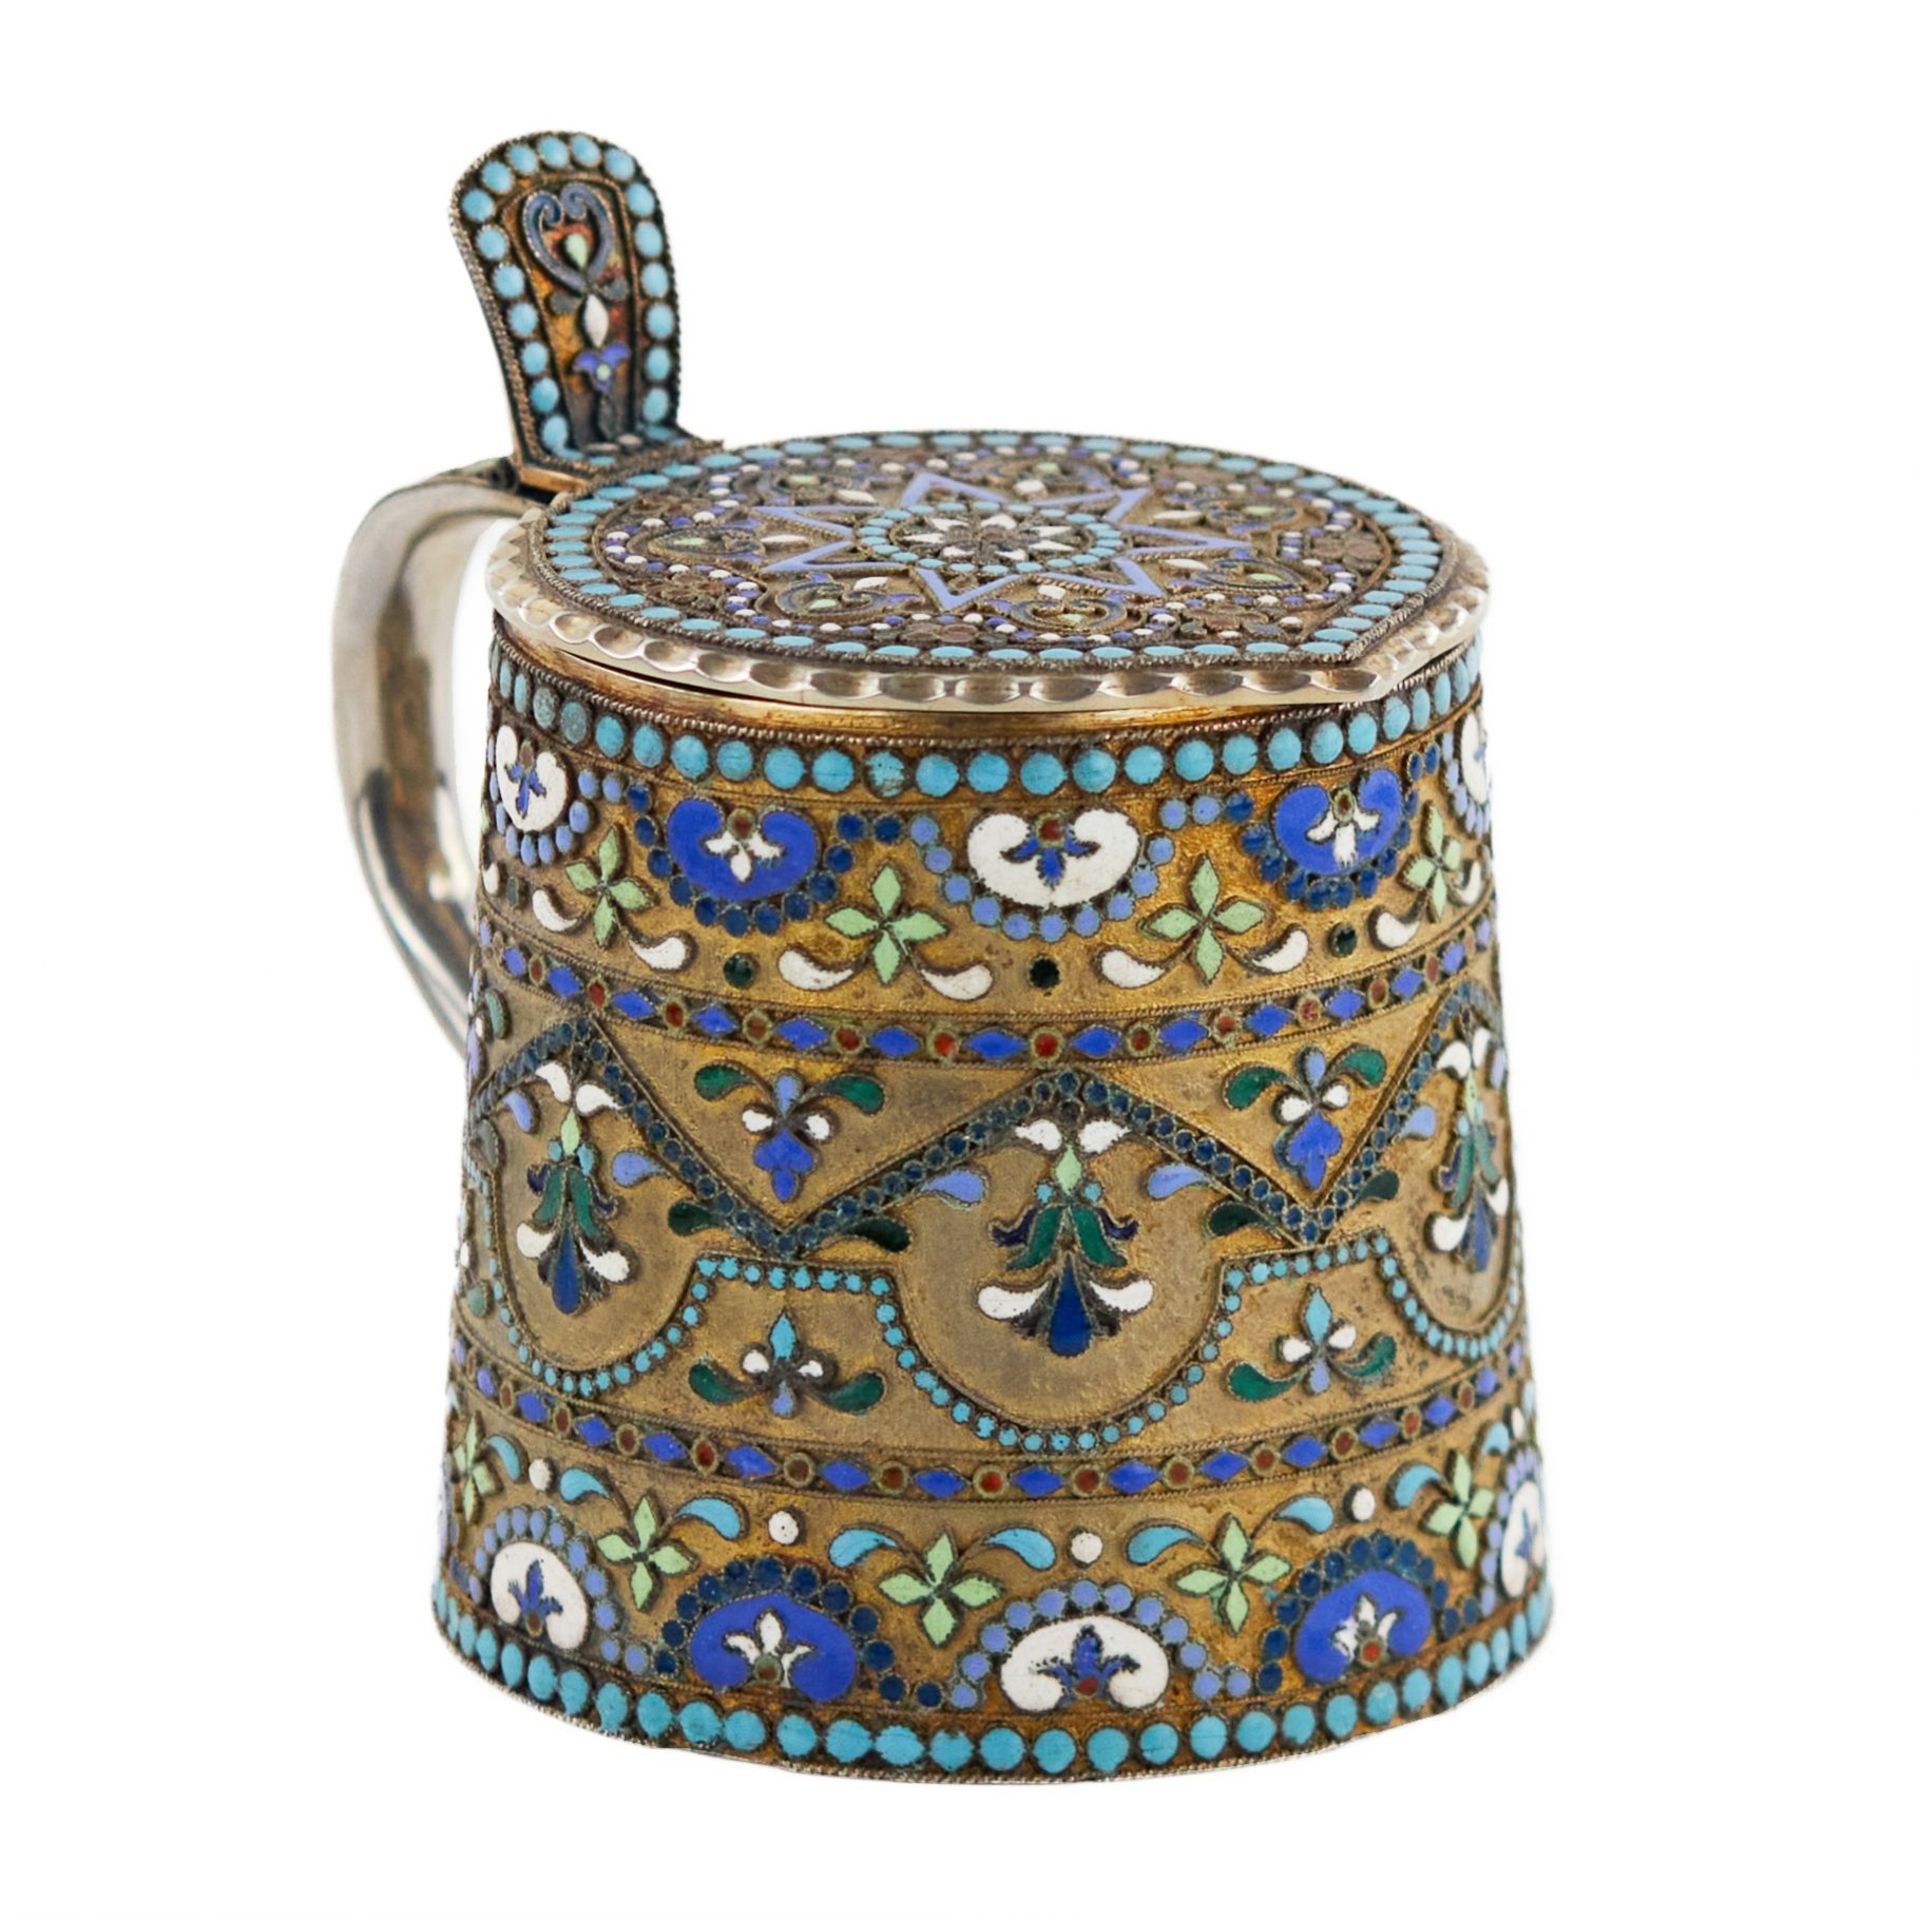 Russian, silver cloisonne enamel mug in neo-Russian style. 20th century. - Image 2 of 8